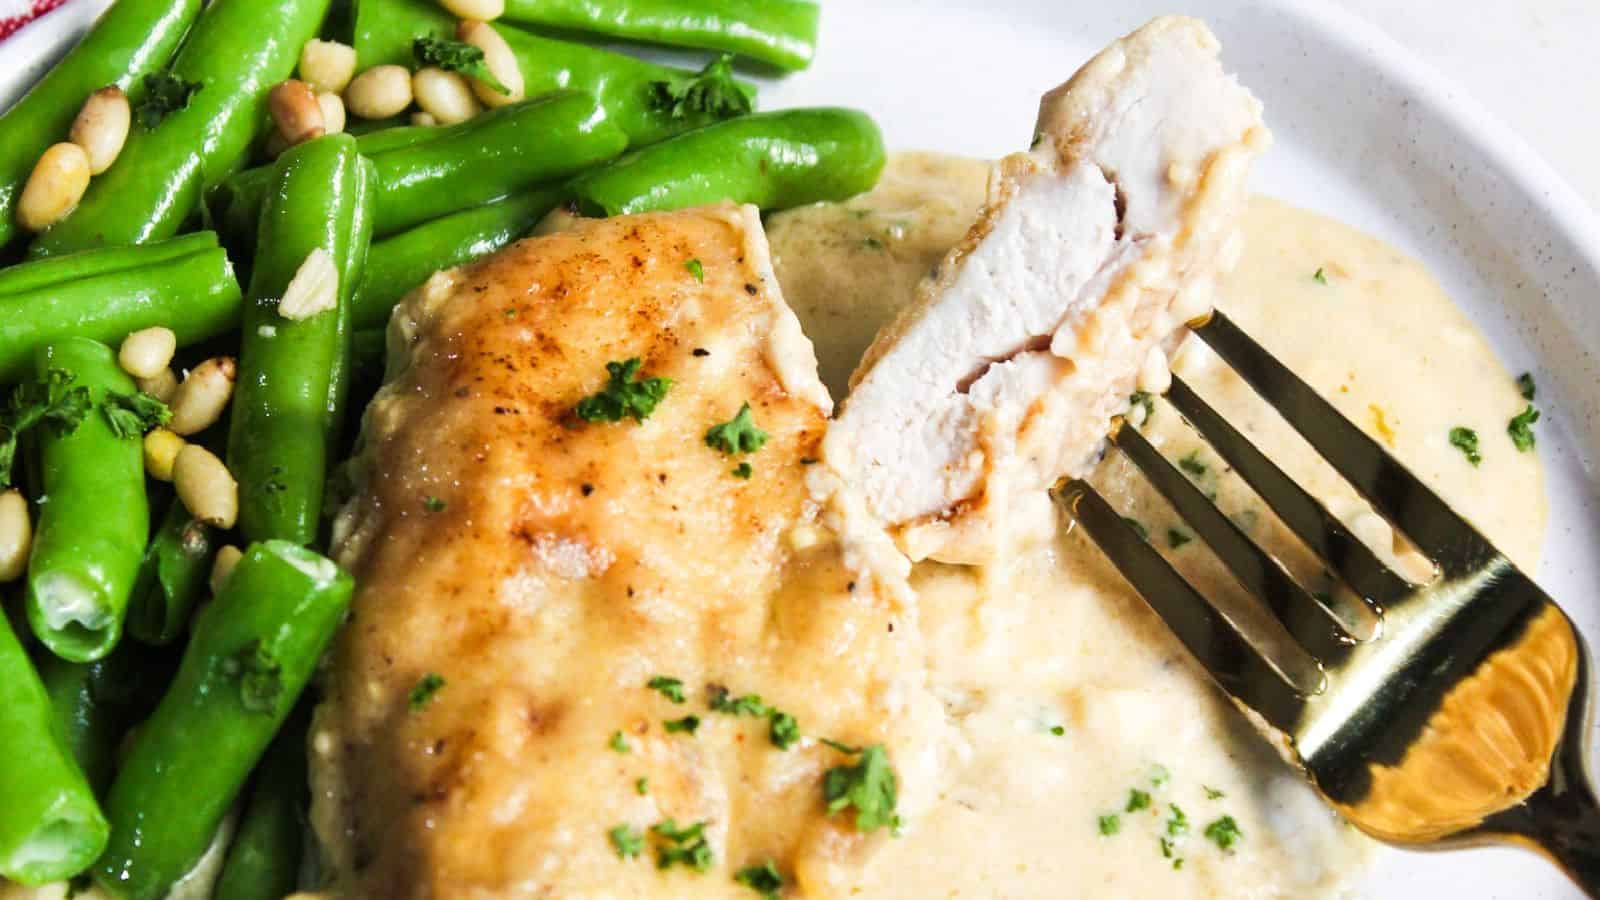 A plate with chicken and green beans on it.